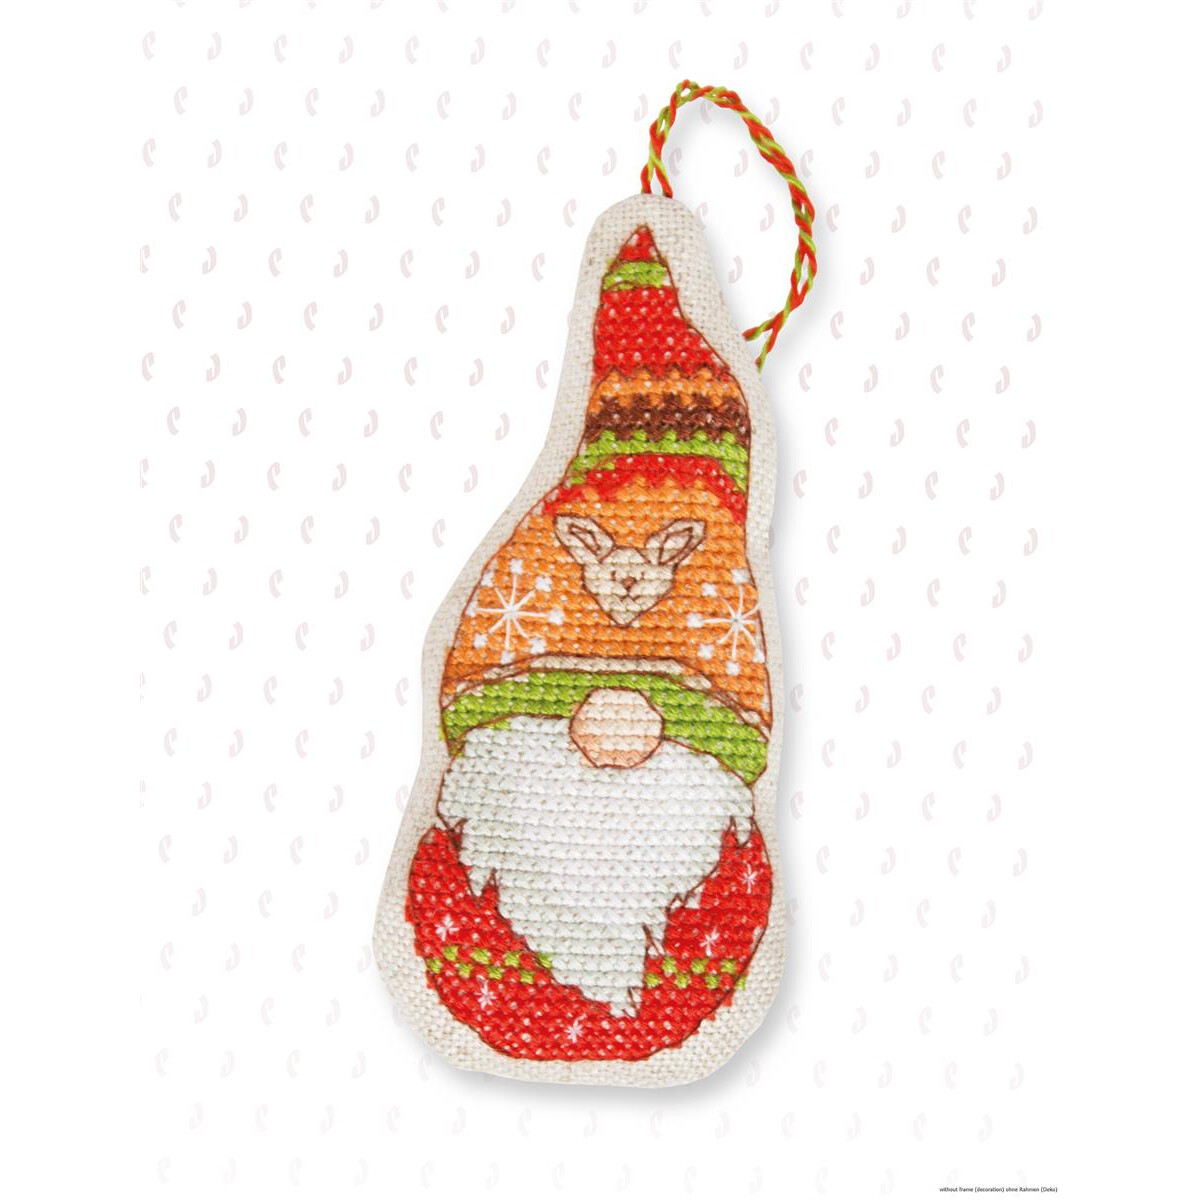 An enchanting Christmas ornament in the shape of a gnome...